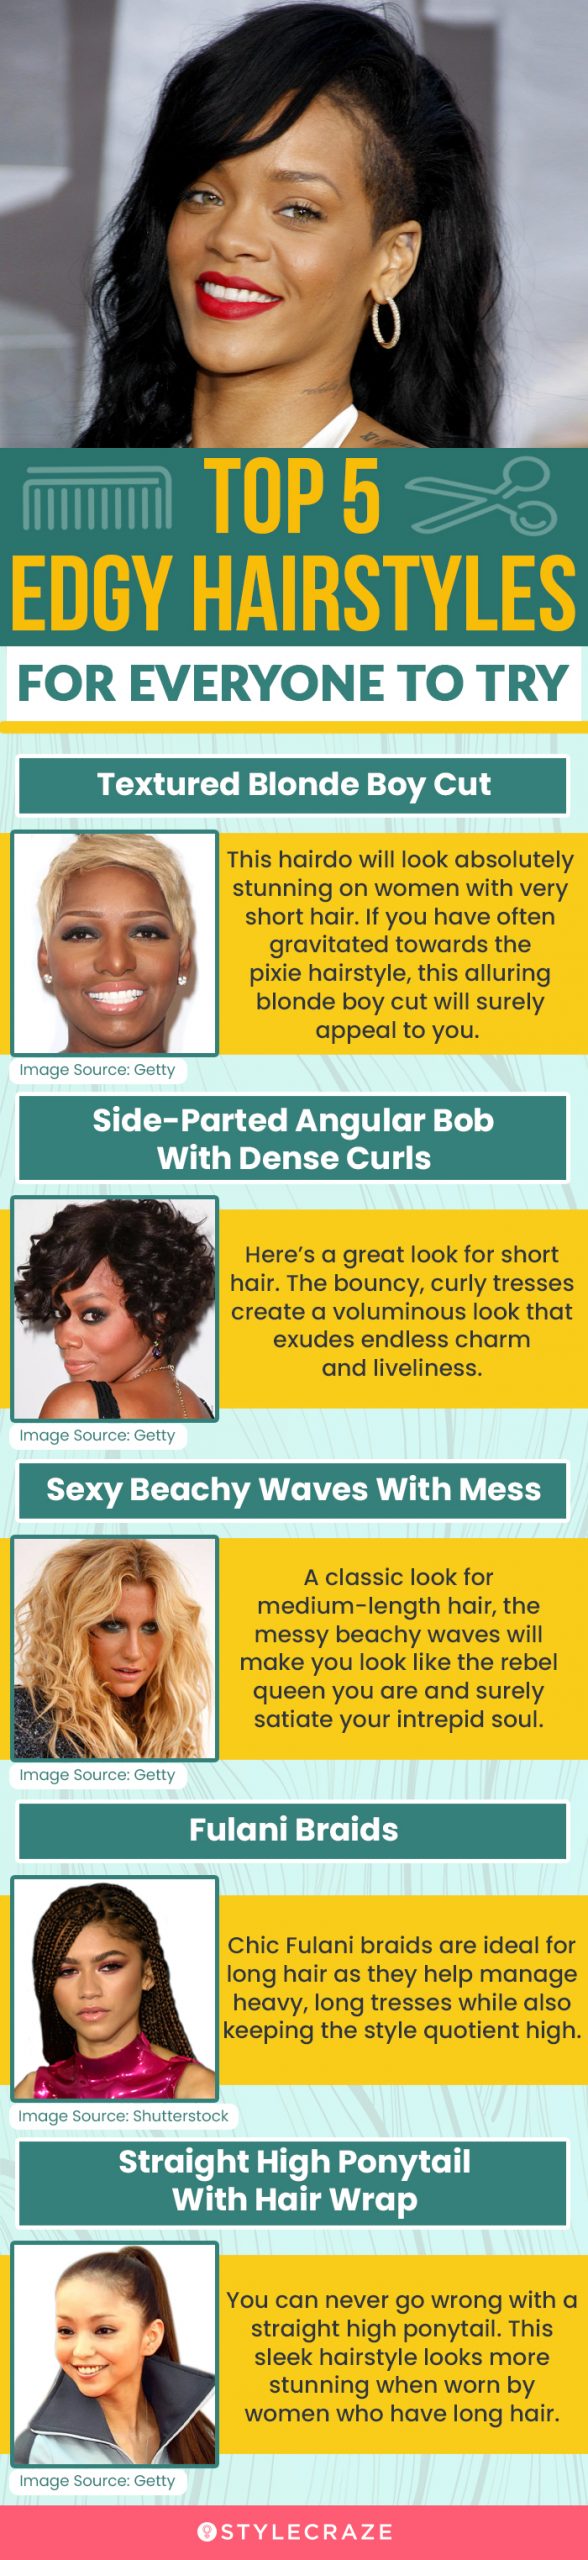 top 5 edgy hairstyles for everyone to (infographic)